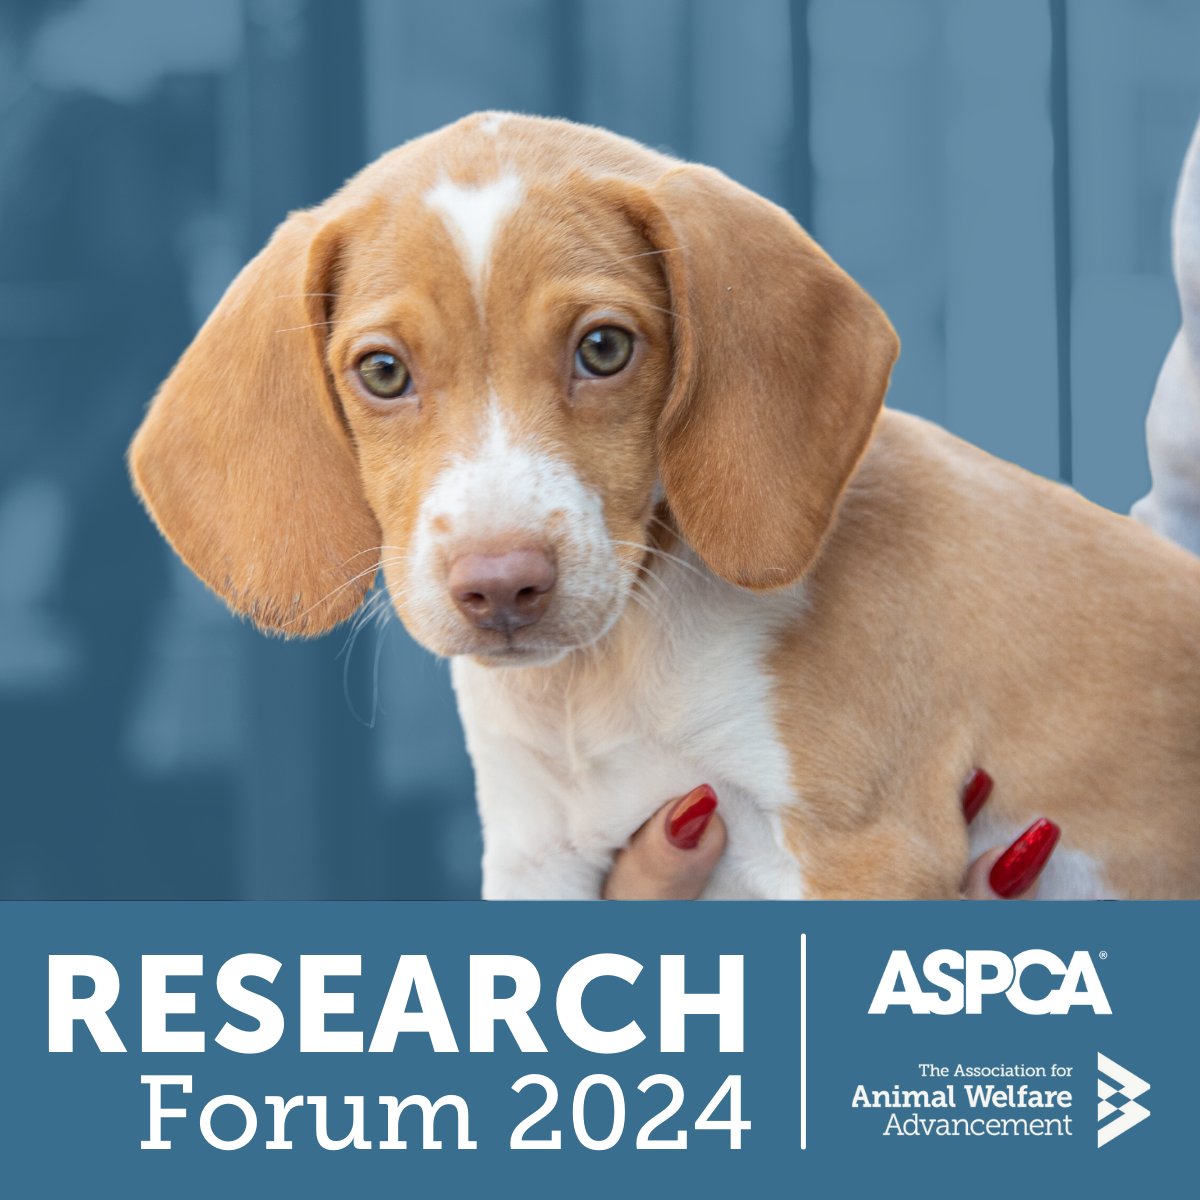 ⭐Research Grant Applications Now Open!⭐ As we gear up for the 2024 @ASPCA-AWAA Research Forum, we're excited to announce that applications for our research grants are now being accepted. #GrantOpportunity #AnimalRescue Apply before June 30. 👇 airtable.com/appPgjFngLapeT…